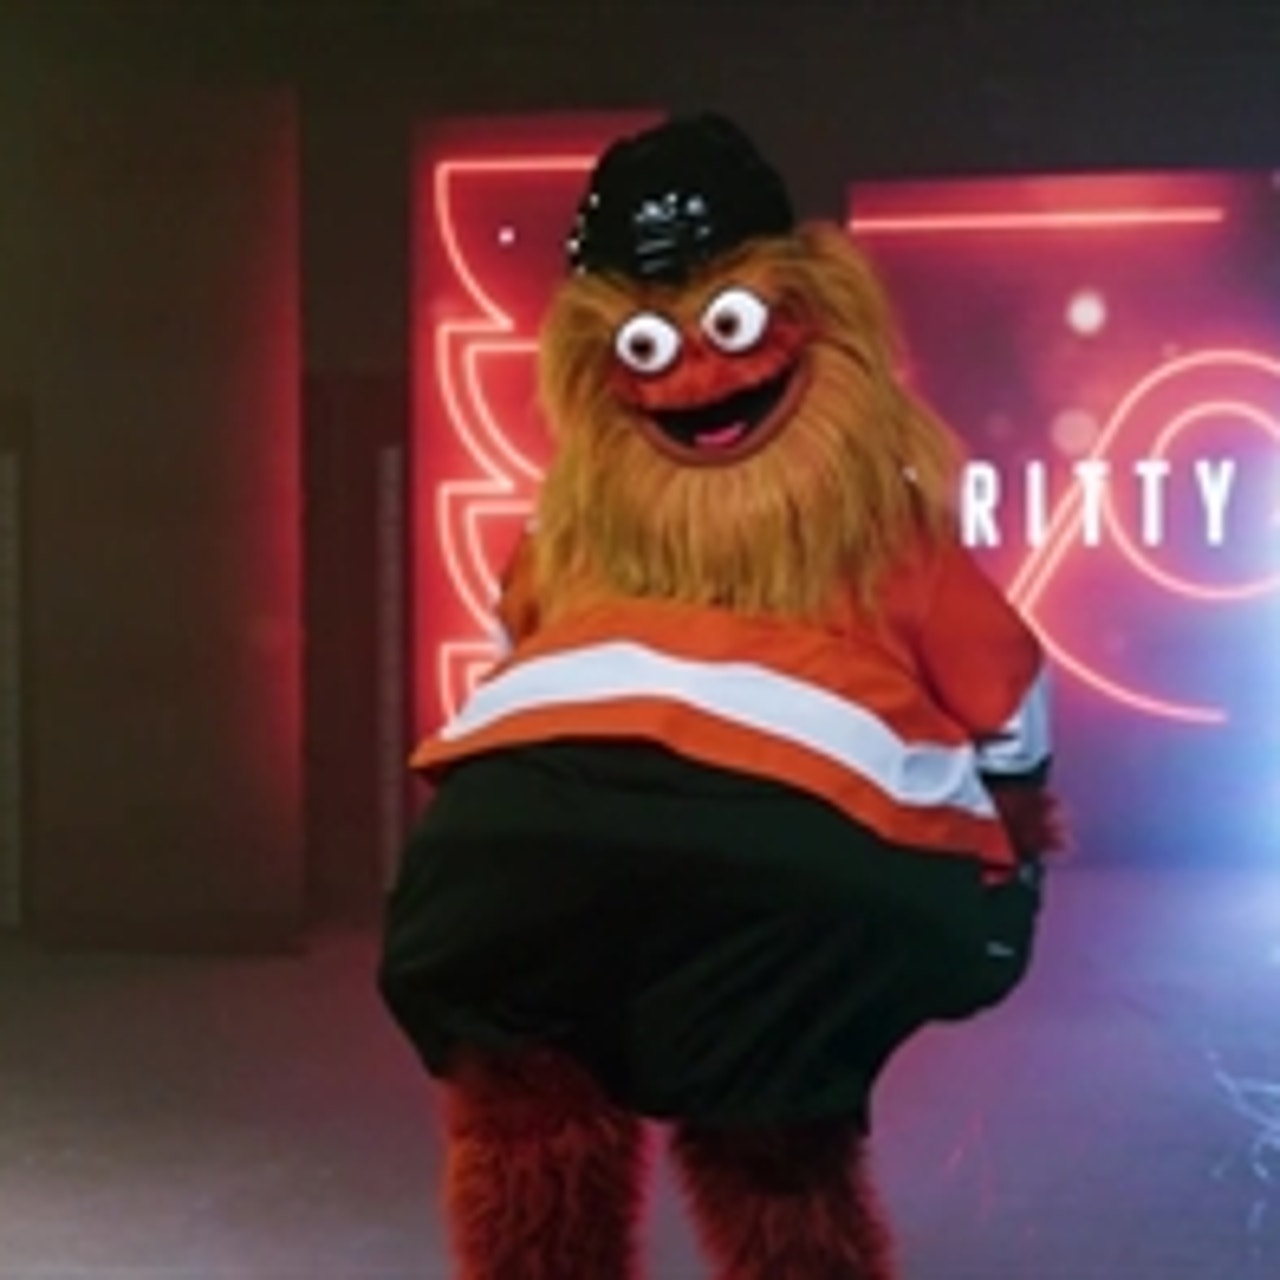 How to the LA Kings feel about Flyers mascot Gritty?